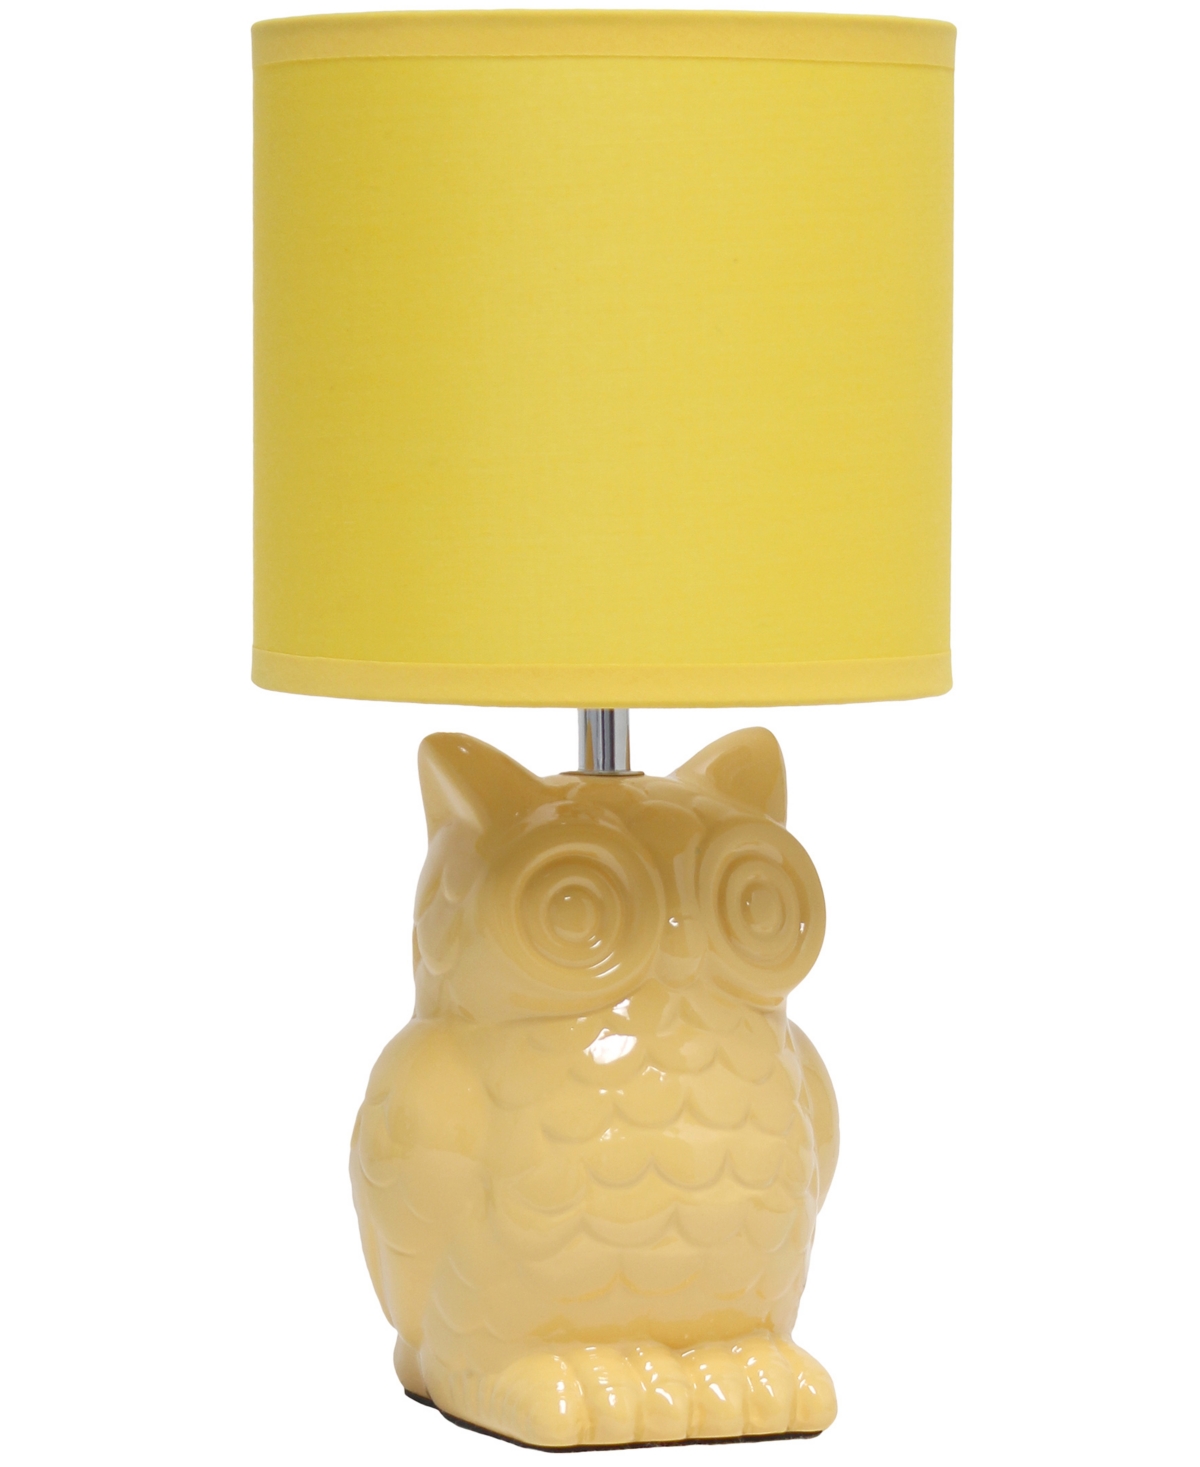 Shop Simple Designs 12.8" Tall Contemporary Ceramic Owl Bedside Table Desk Lamp With Matching Fabric Shade In Sage Green